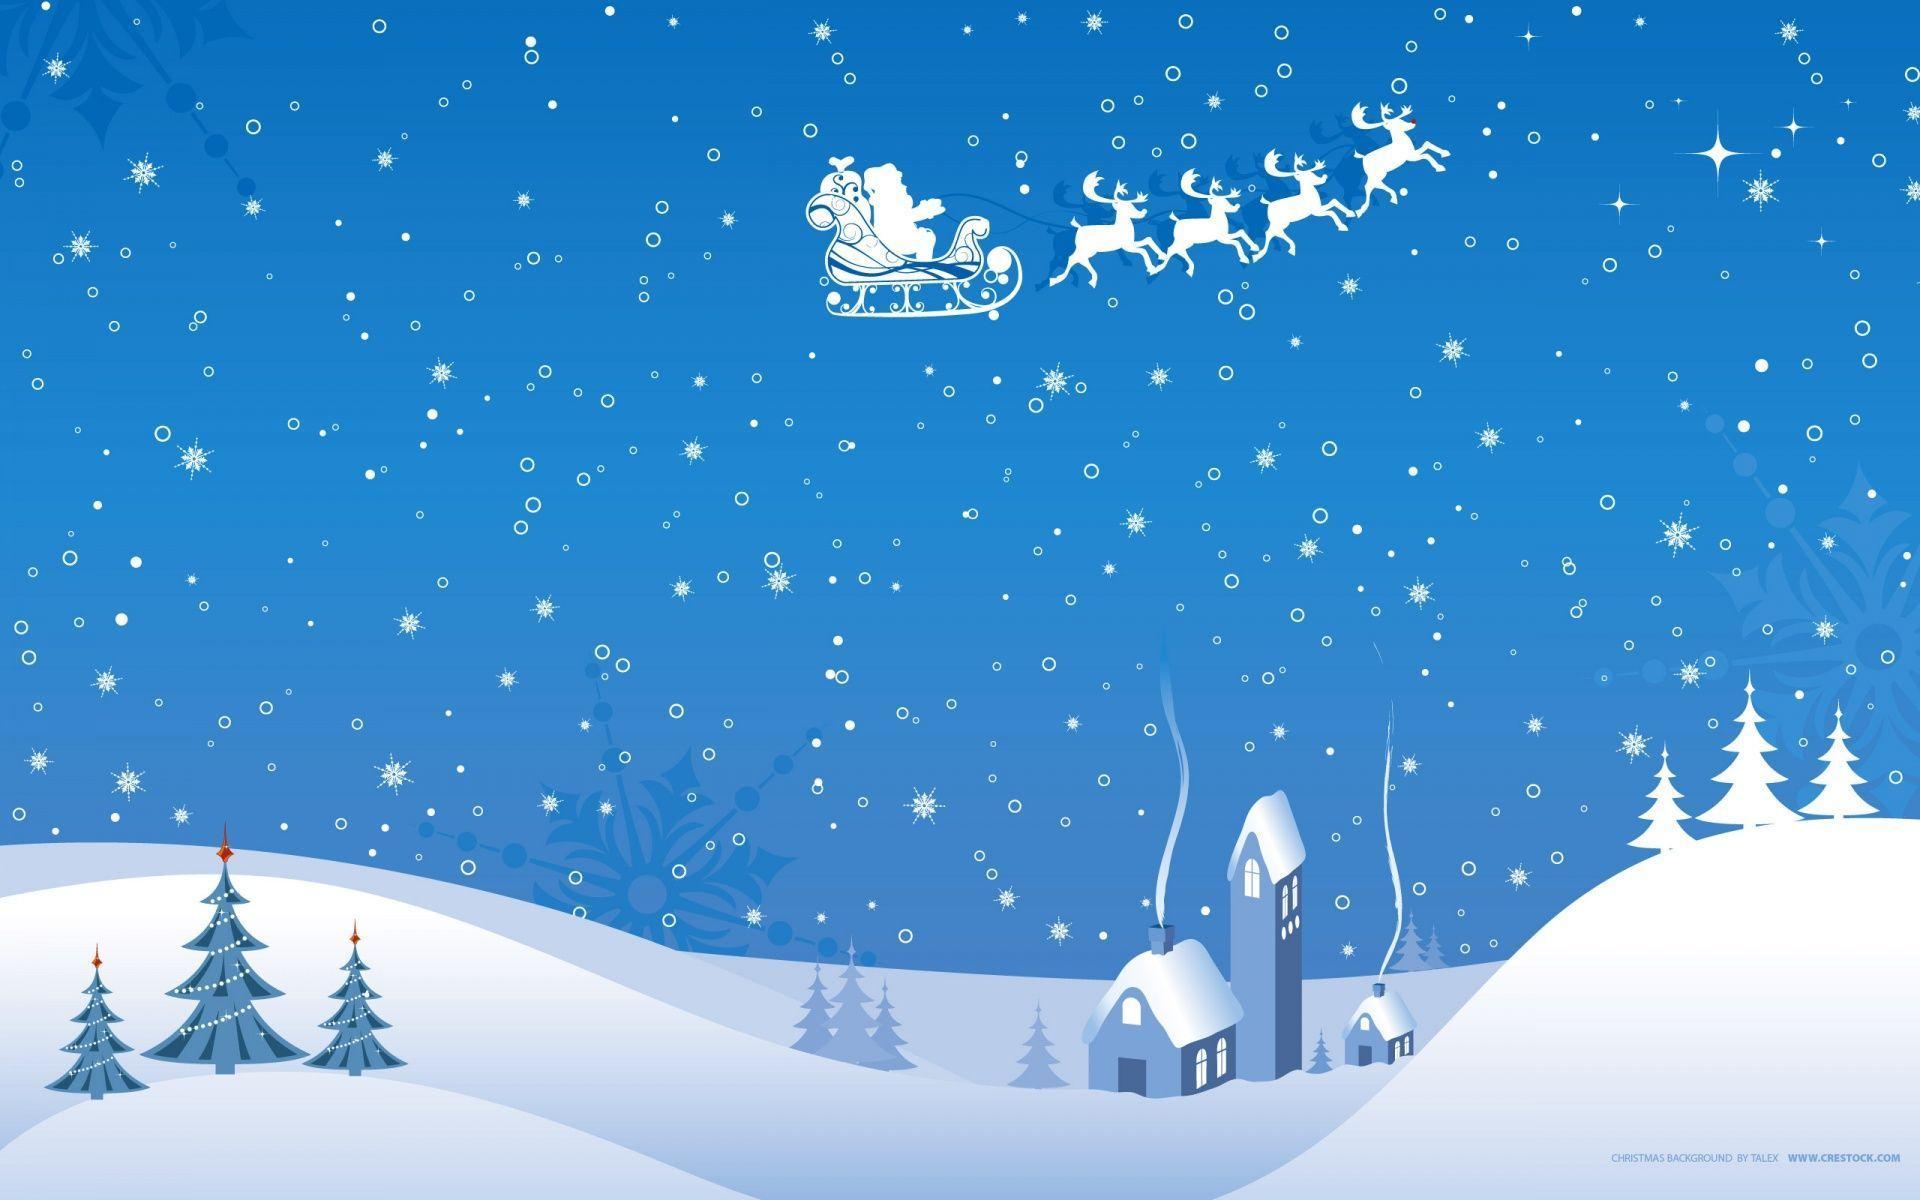 Wallpaper background winter christmas vector 1920x1200 px